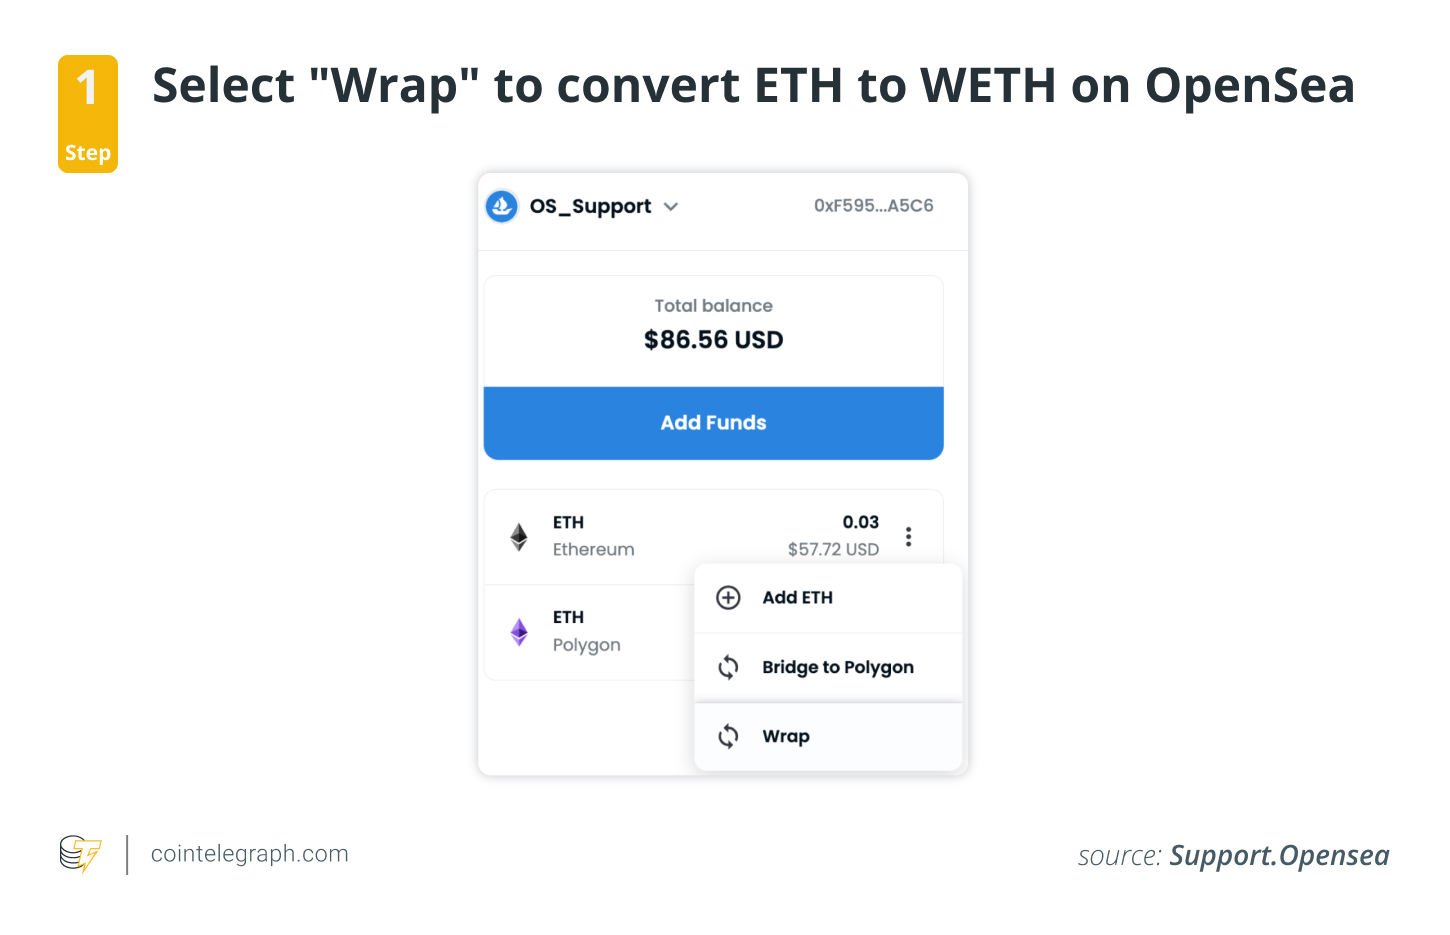 Step 1: Select Wrap to convert ETH to WETH on OpenSea